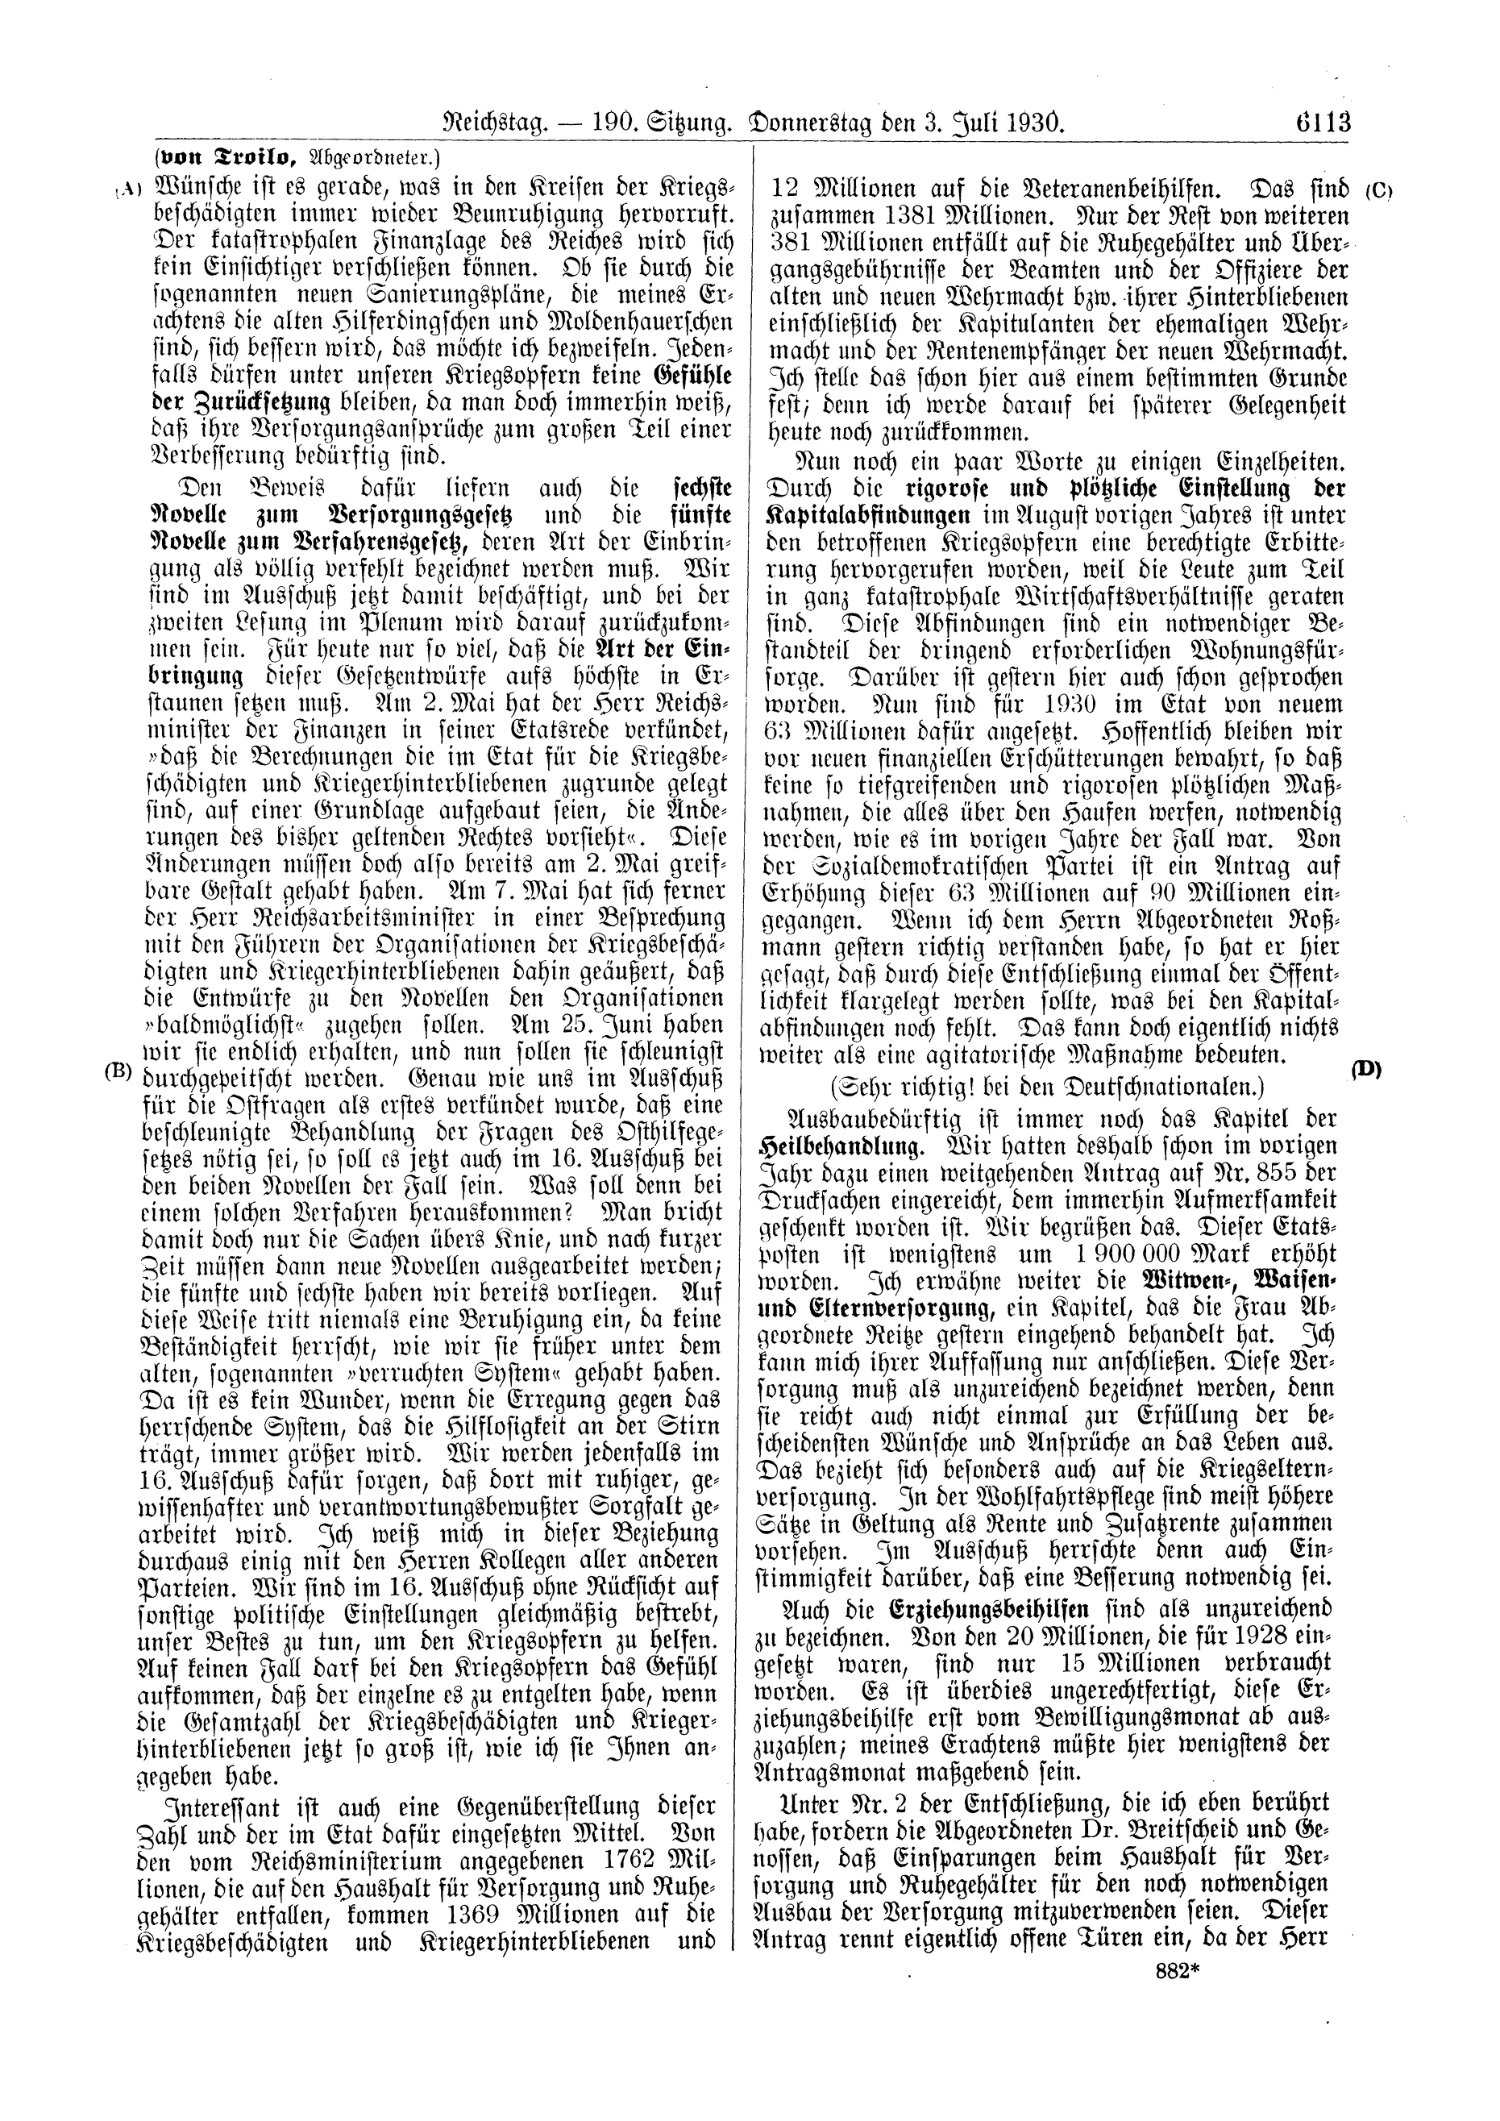 Scan of page 6113